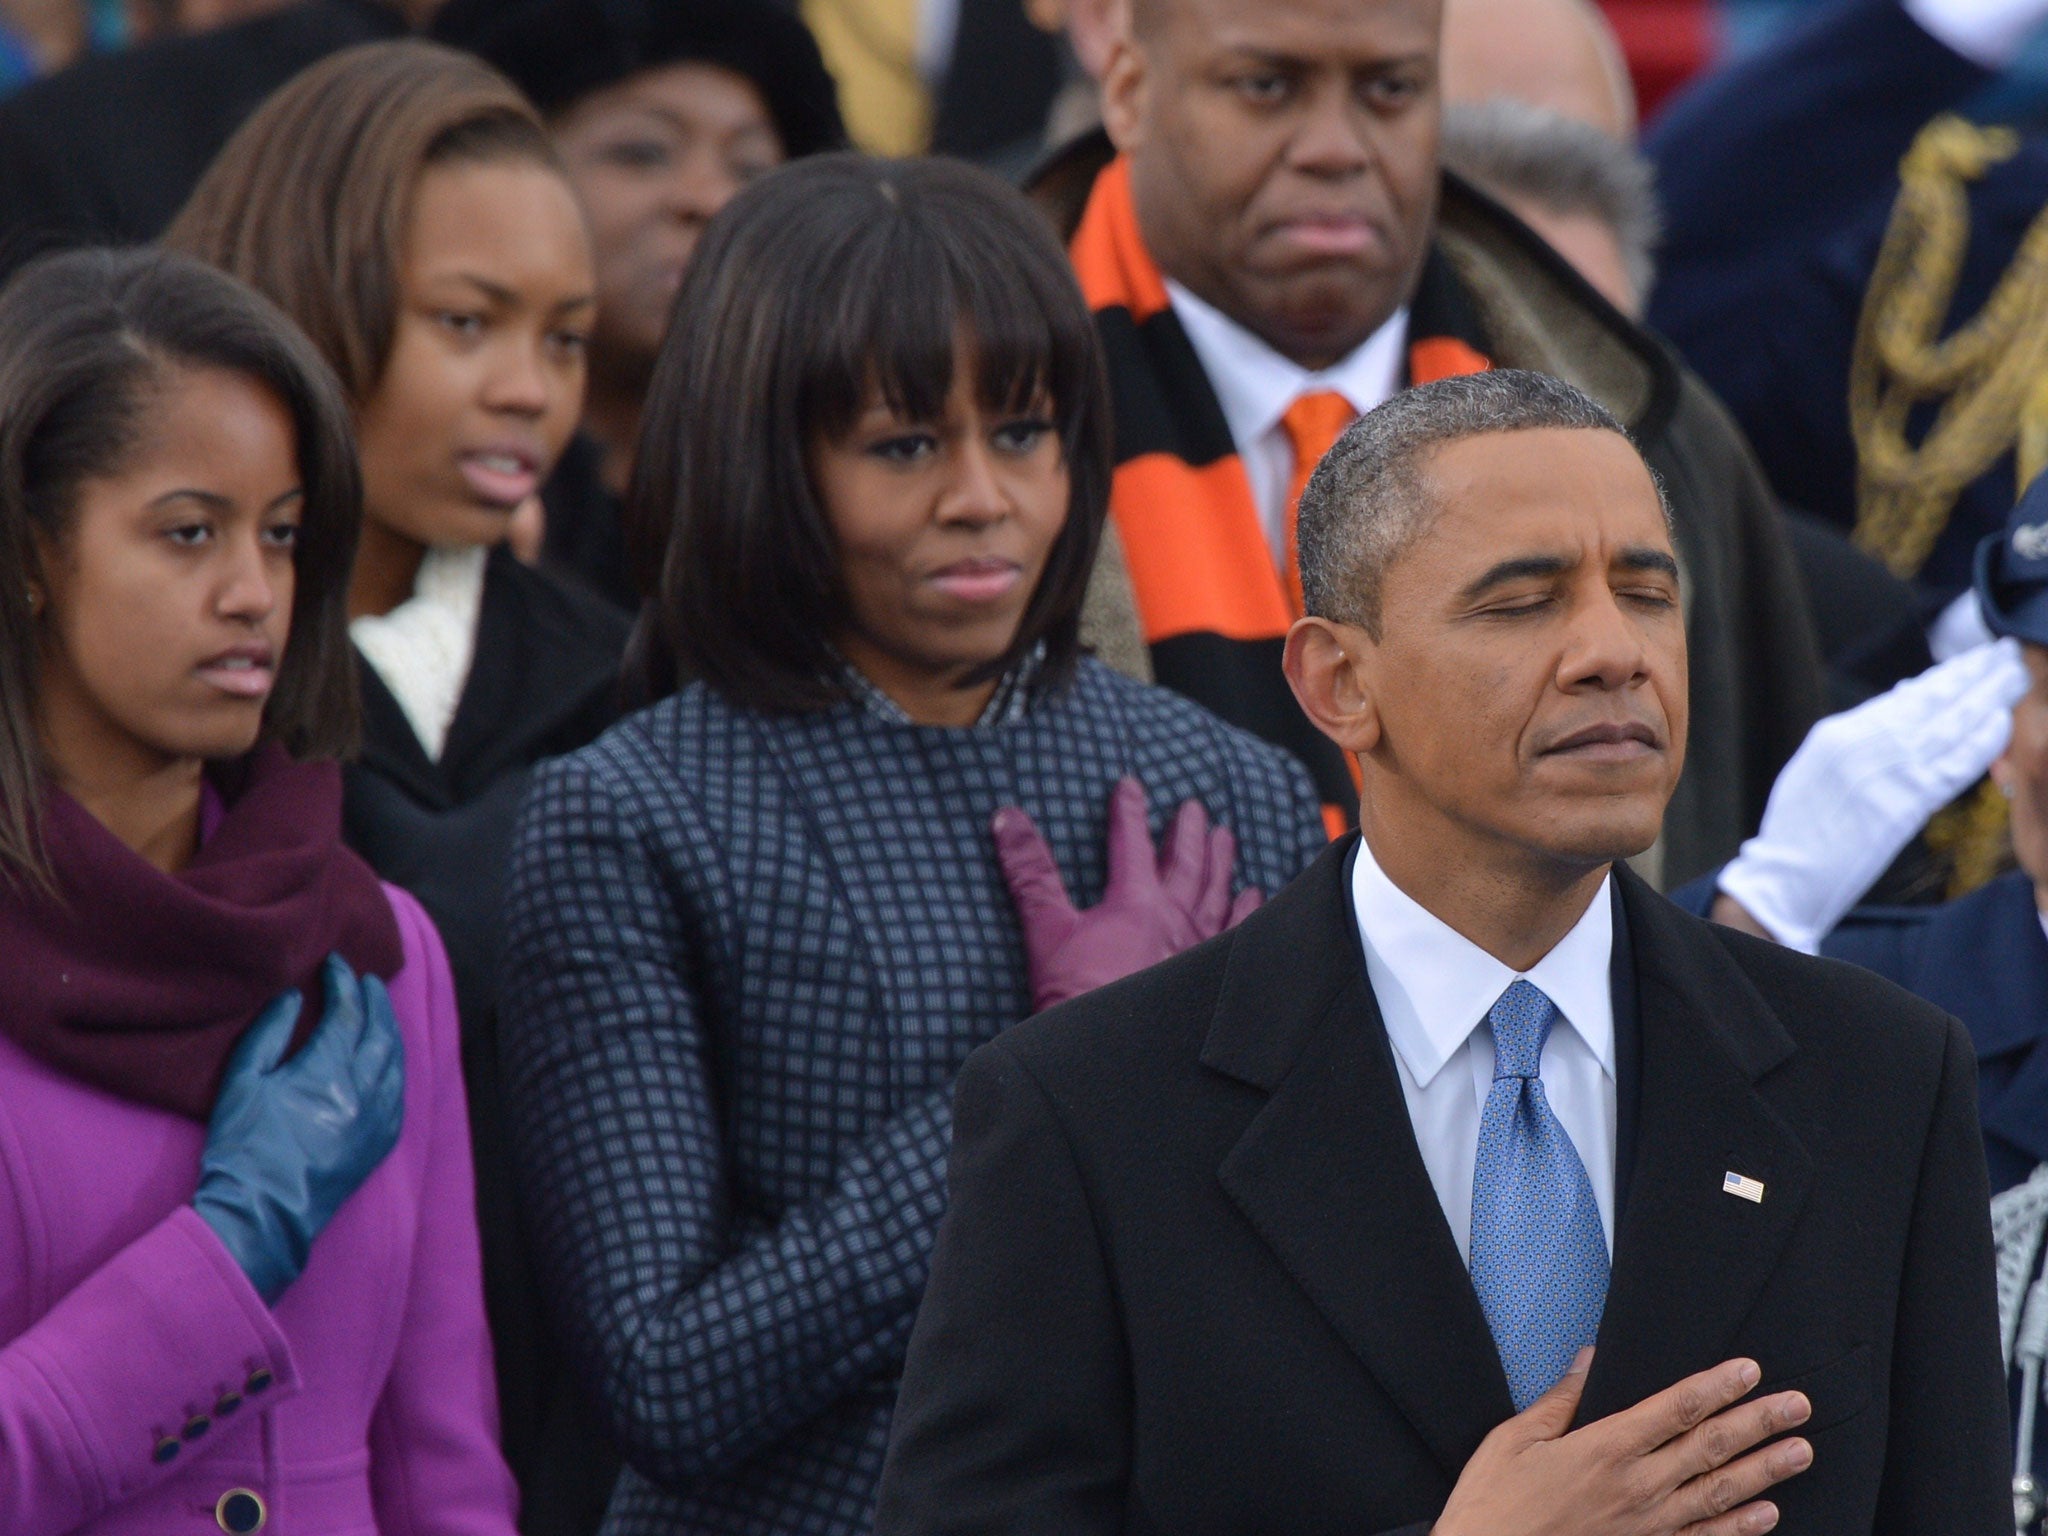 Barack Obama, First Lady Michelle Obama (2nd left) and Malia (left) listen to Beyonce sing during the inauguration ceremonial swearing-in